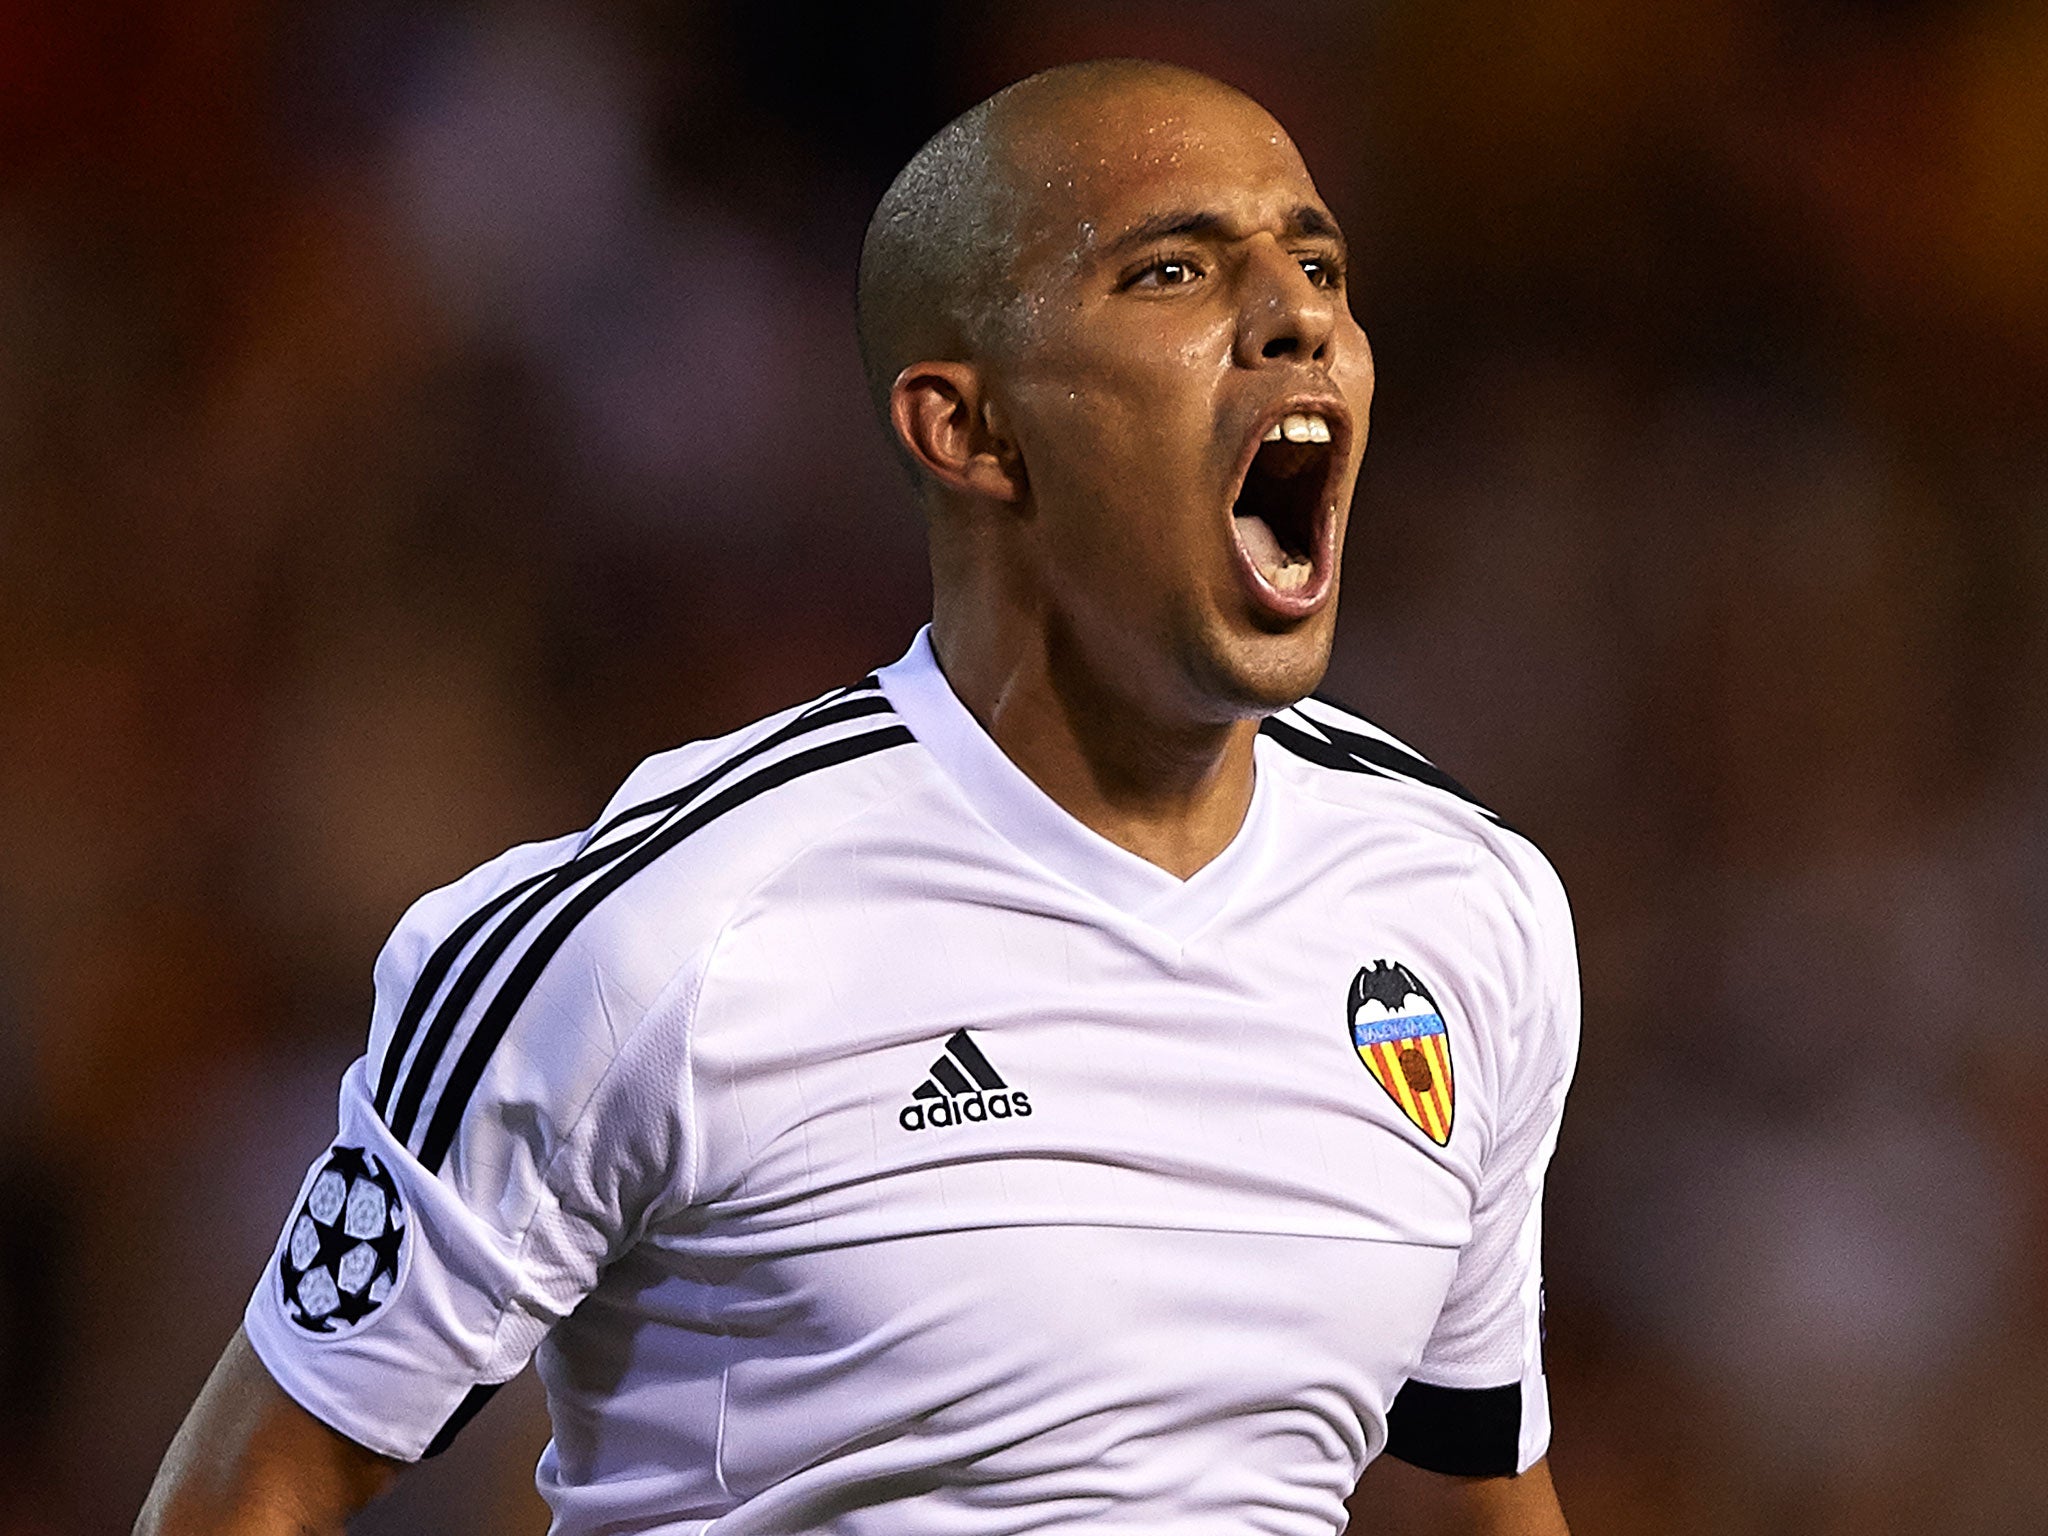 Valencia striker Sofiane Feghouli is out of contract at the end of the season